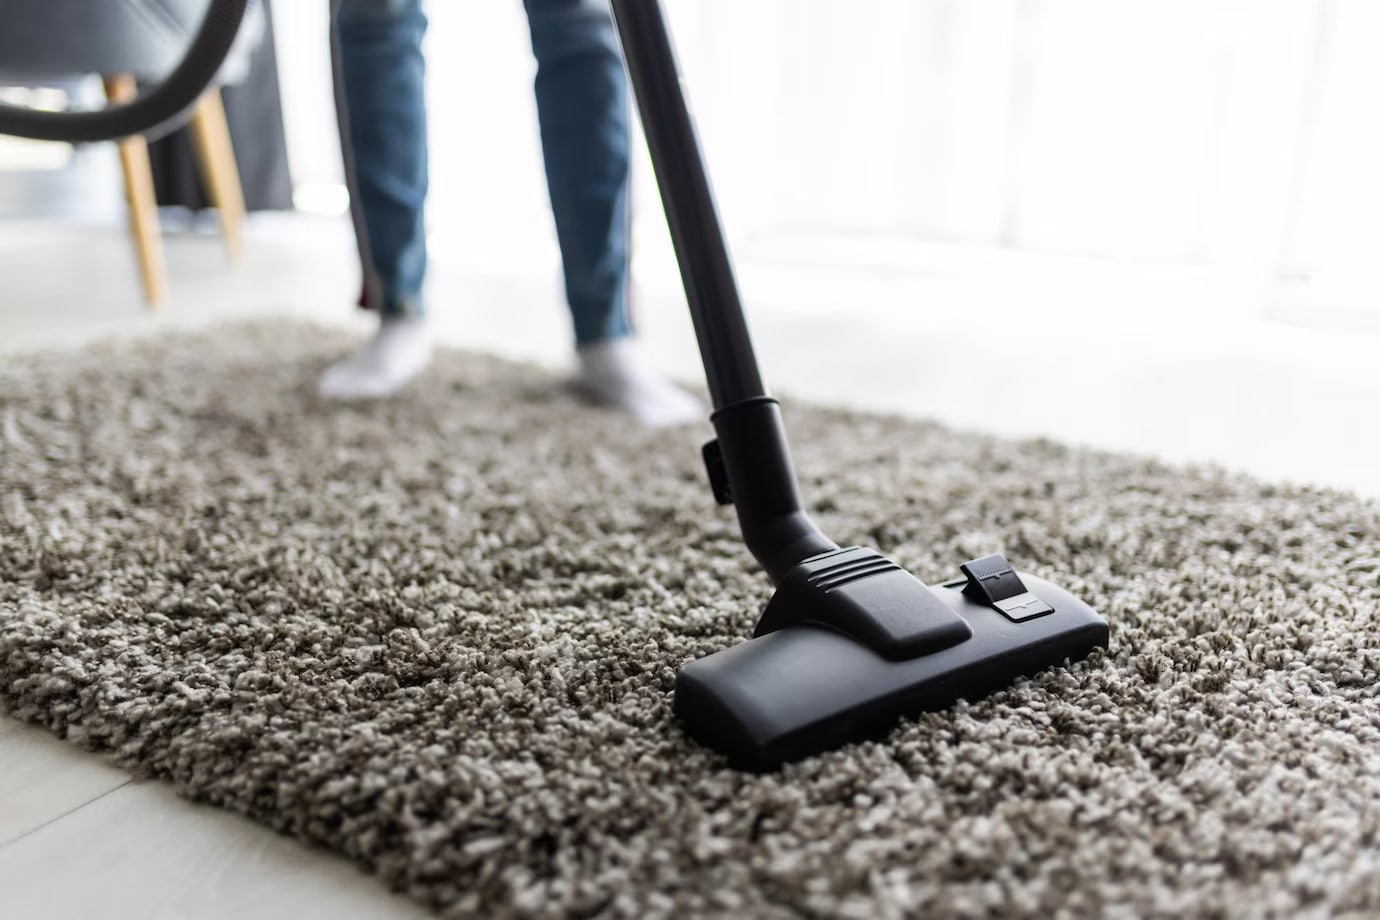 Man cleaning carpet with vacuum cleaner